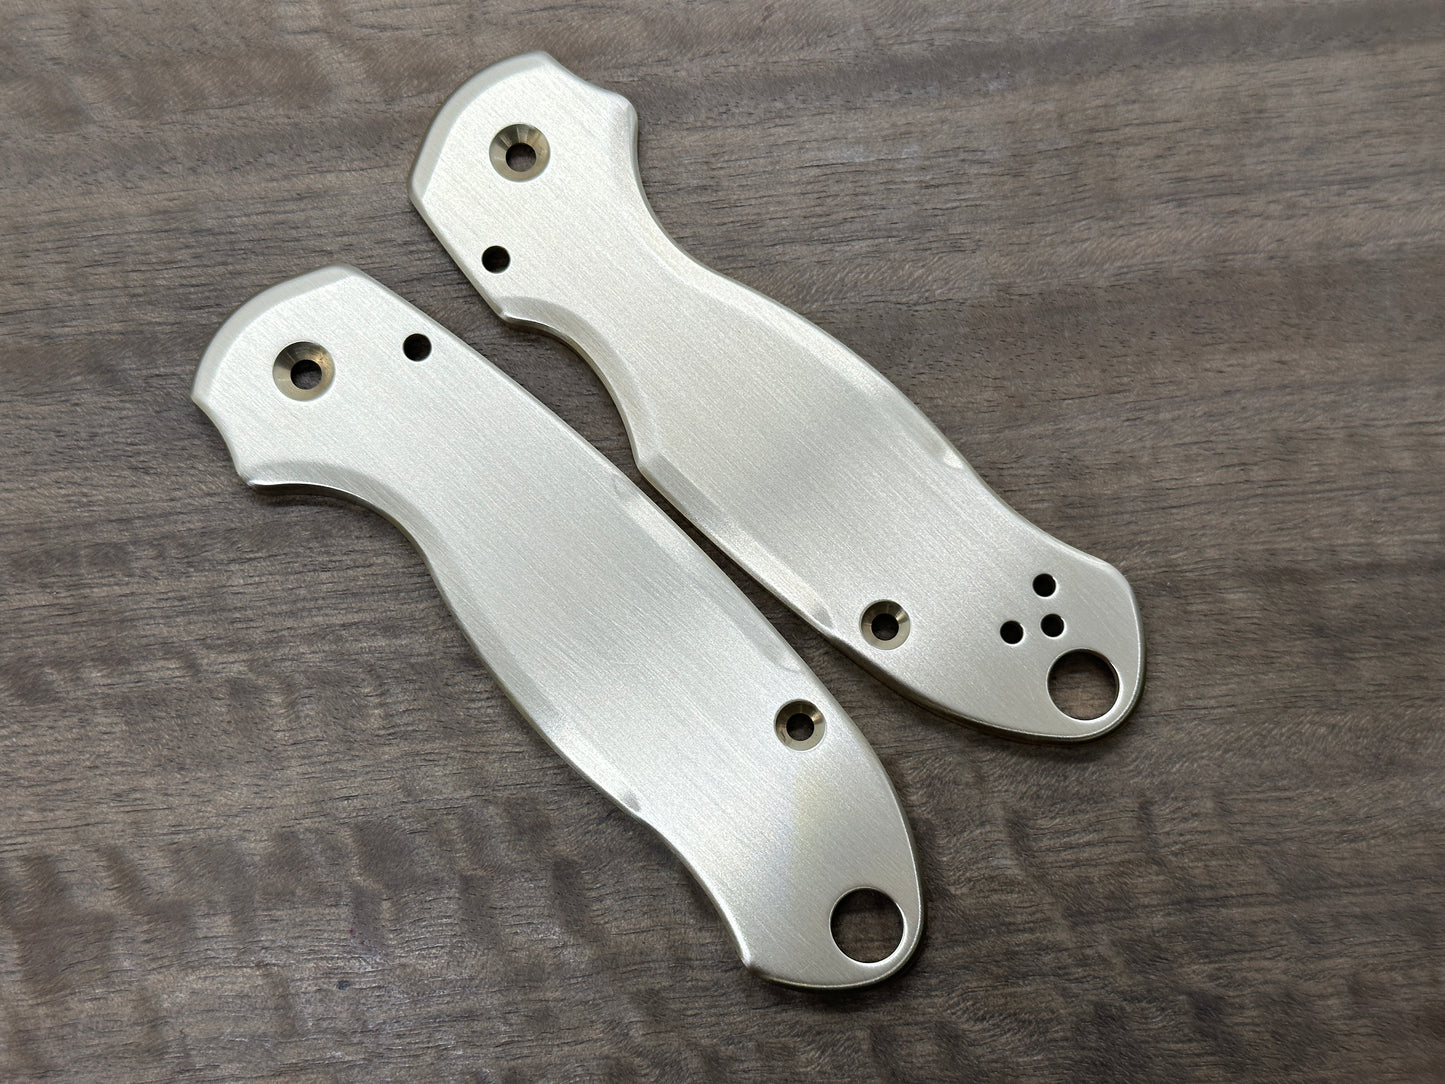 Brushed BRASS Scales for Spyderco Para 3